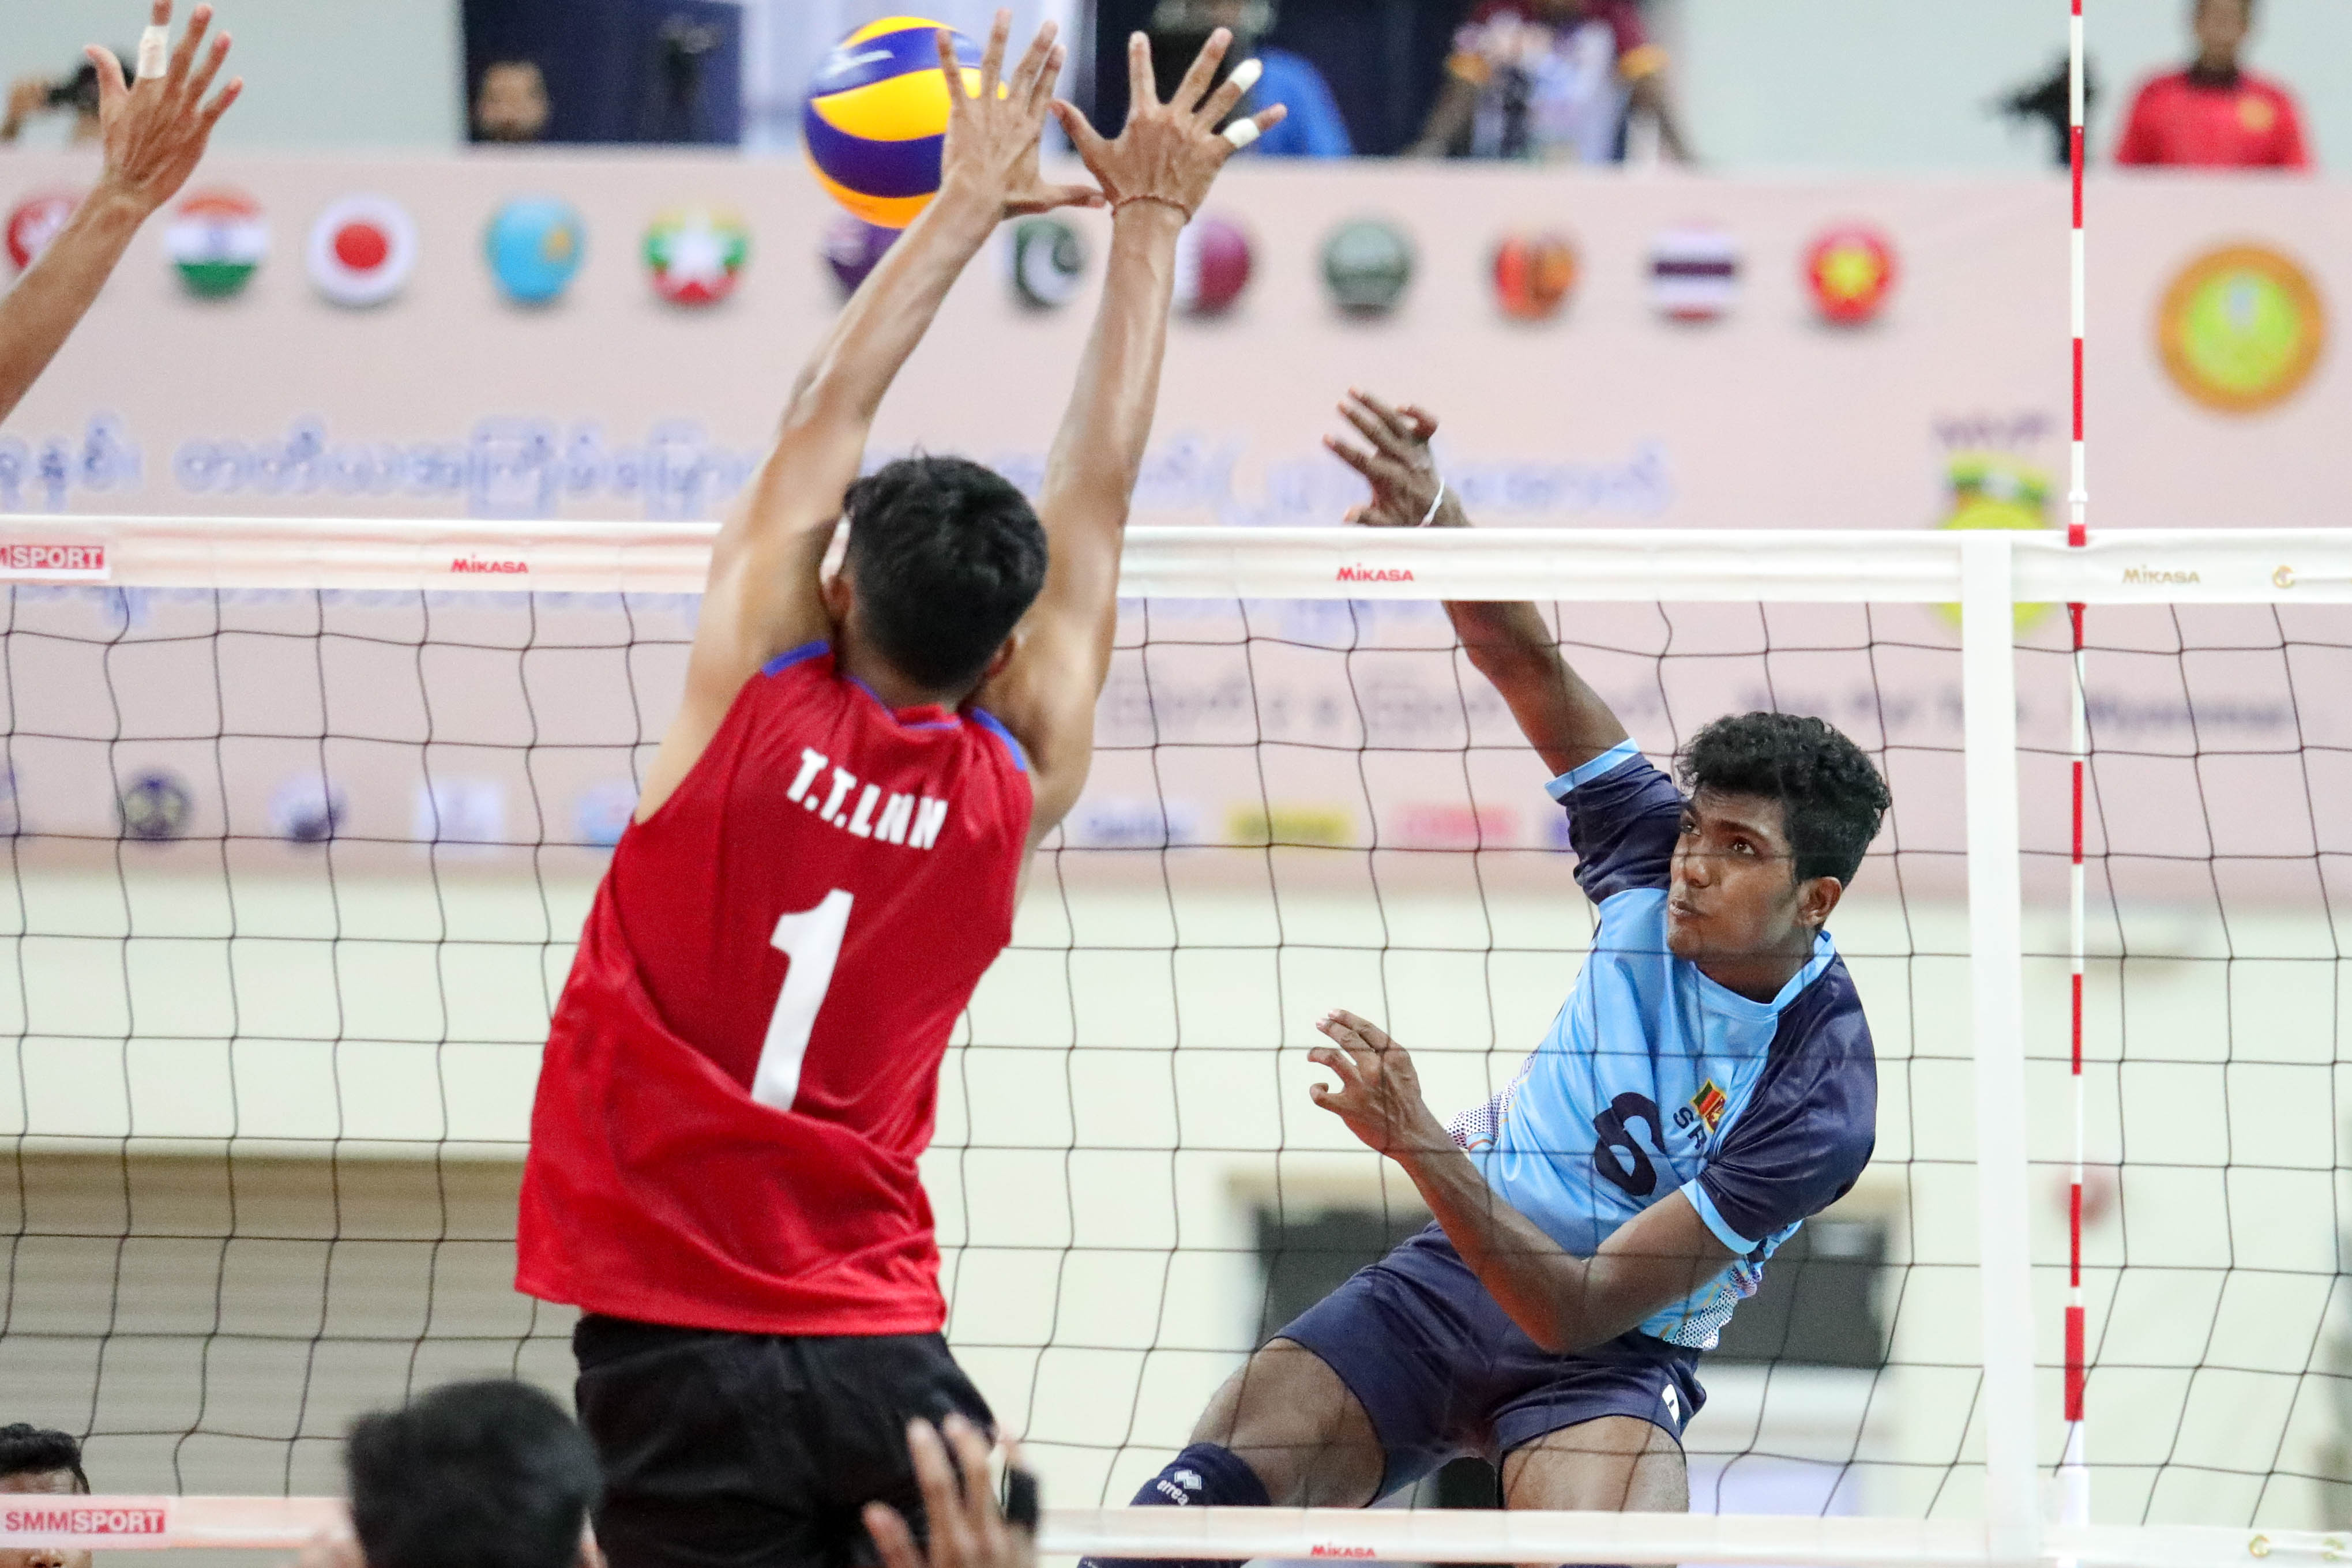 MYANMAR DISAPPOINT HOME FANS WITH 1-3 LOSS TO SRI LANKA